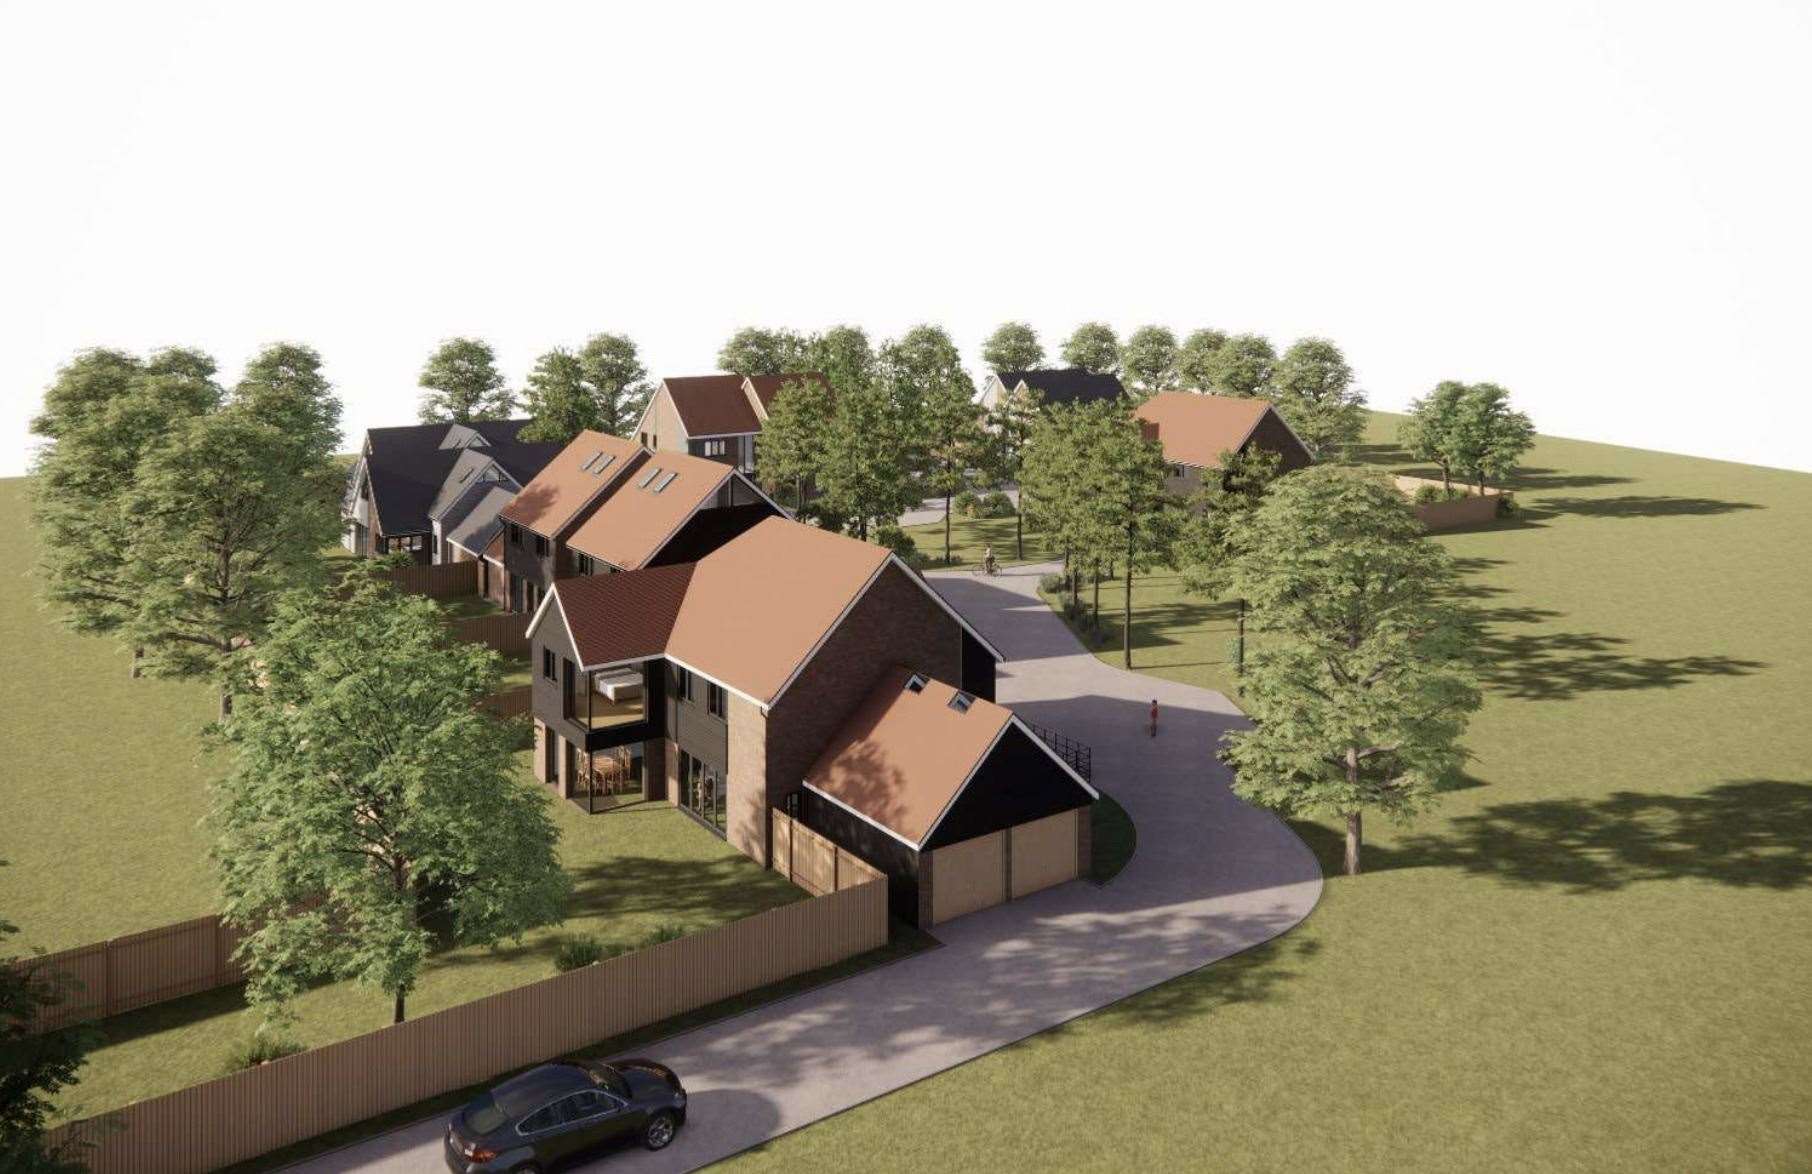 A 10-home develompent is planned for a field in Shepherdswell, near Dover. Picture: OSG Architecture/Woodchurch Property